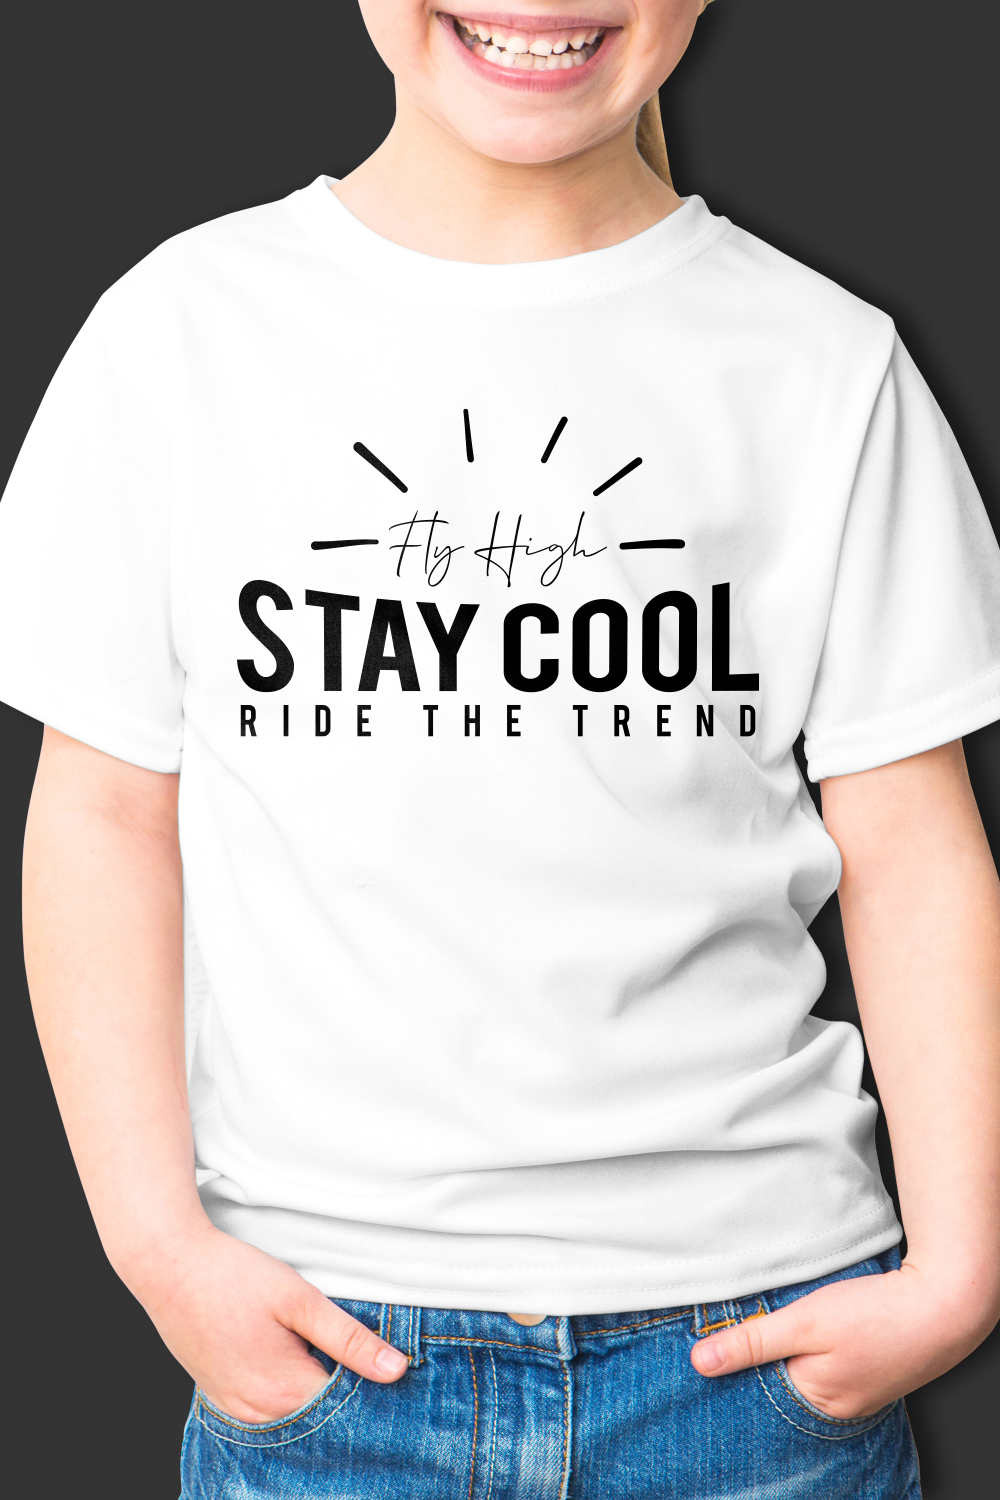 fly high stay cool ride the trend tshirt design pinterest preview image.